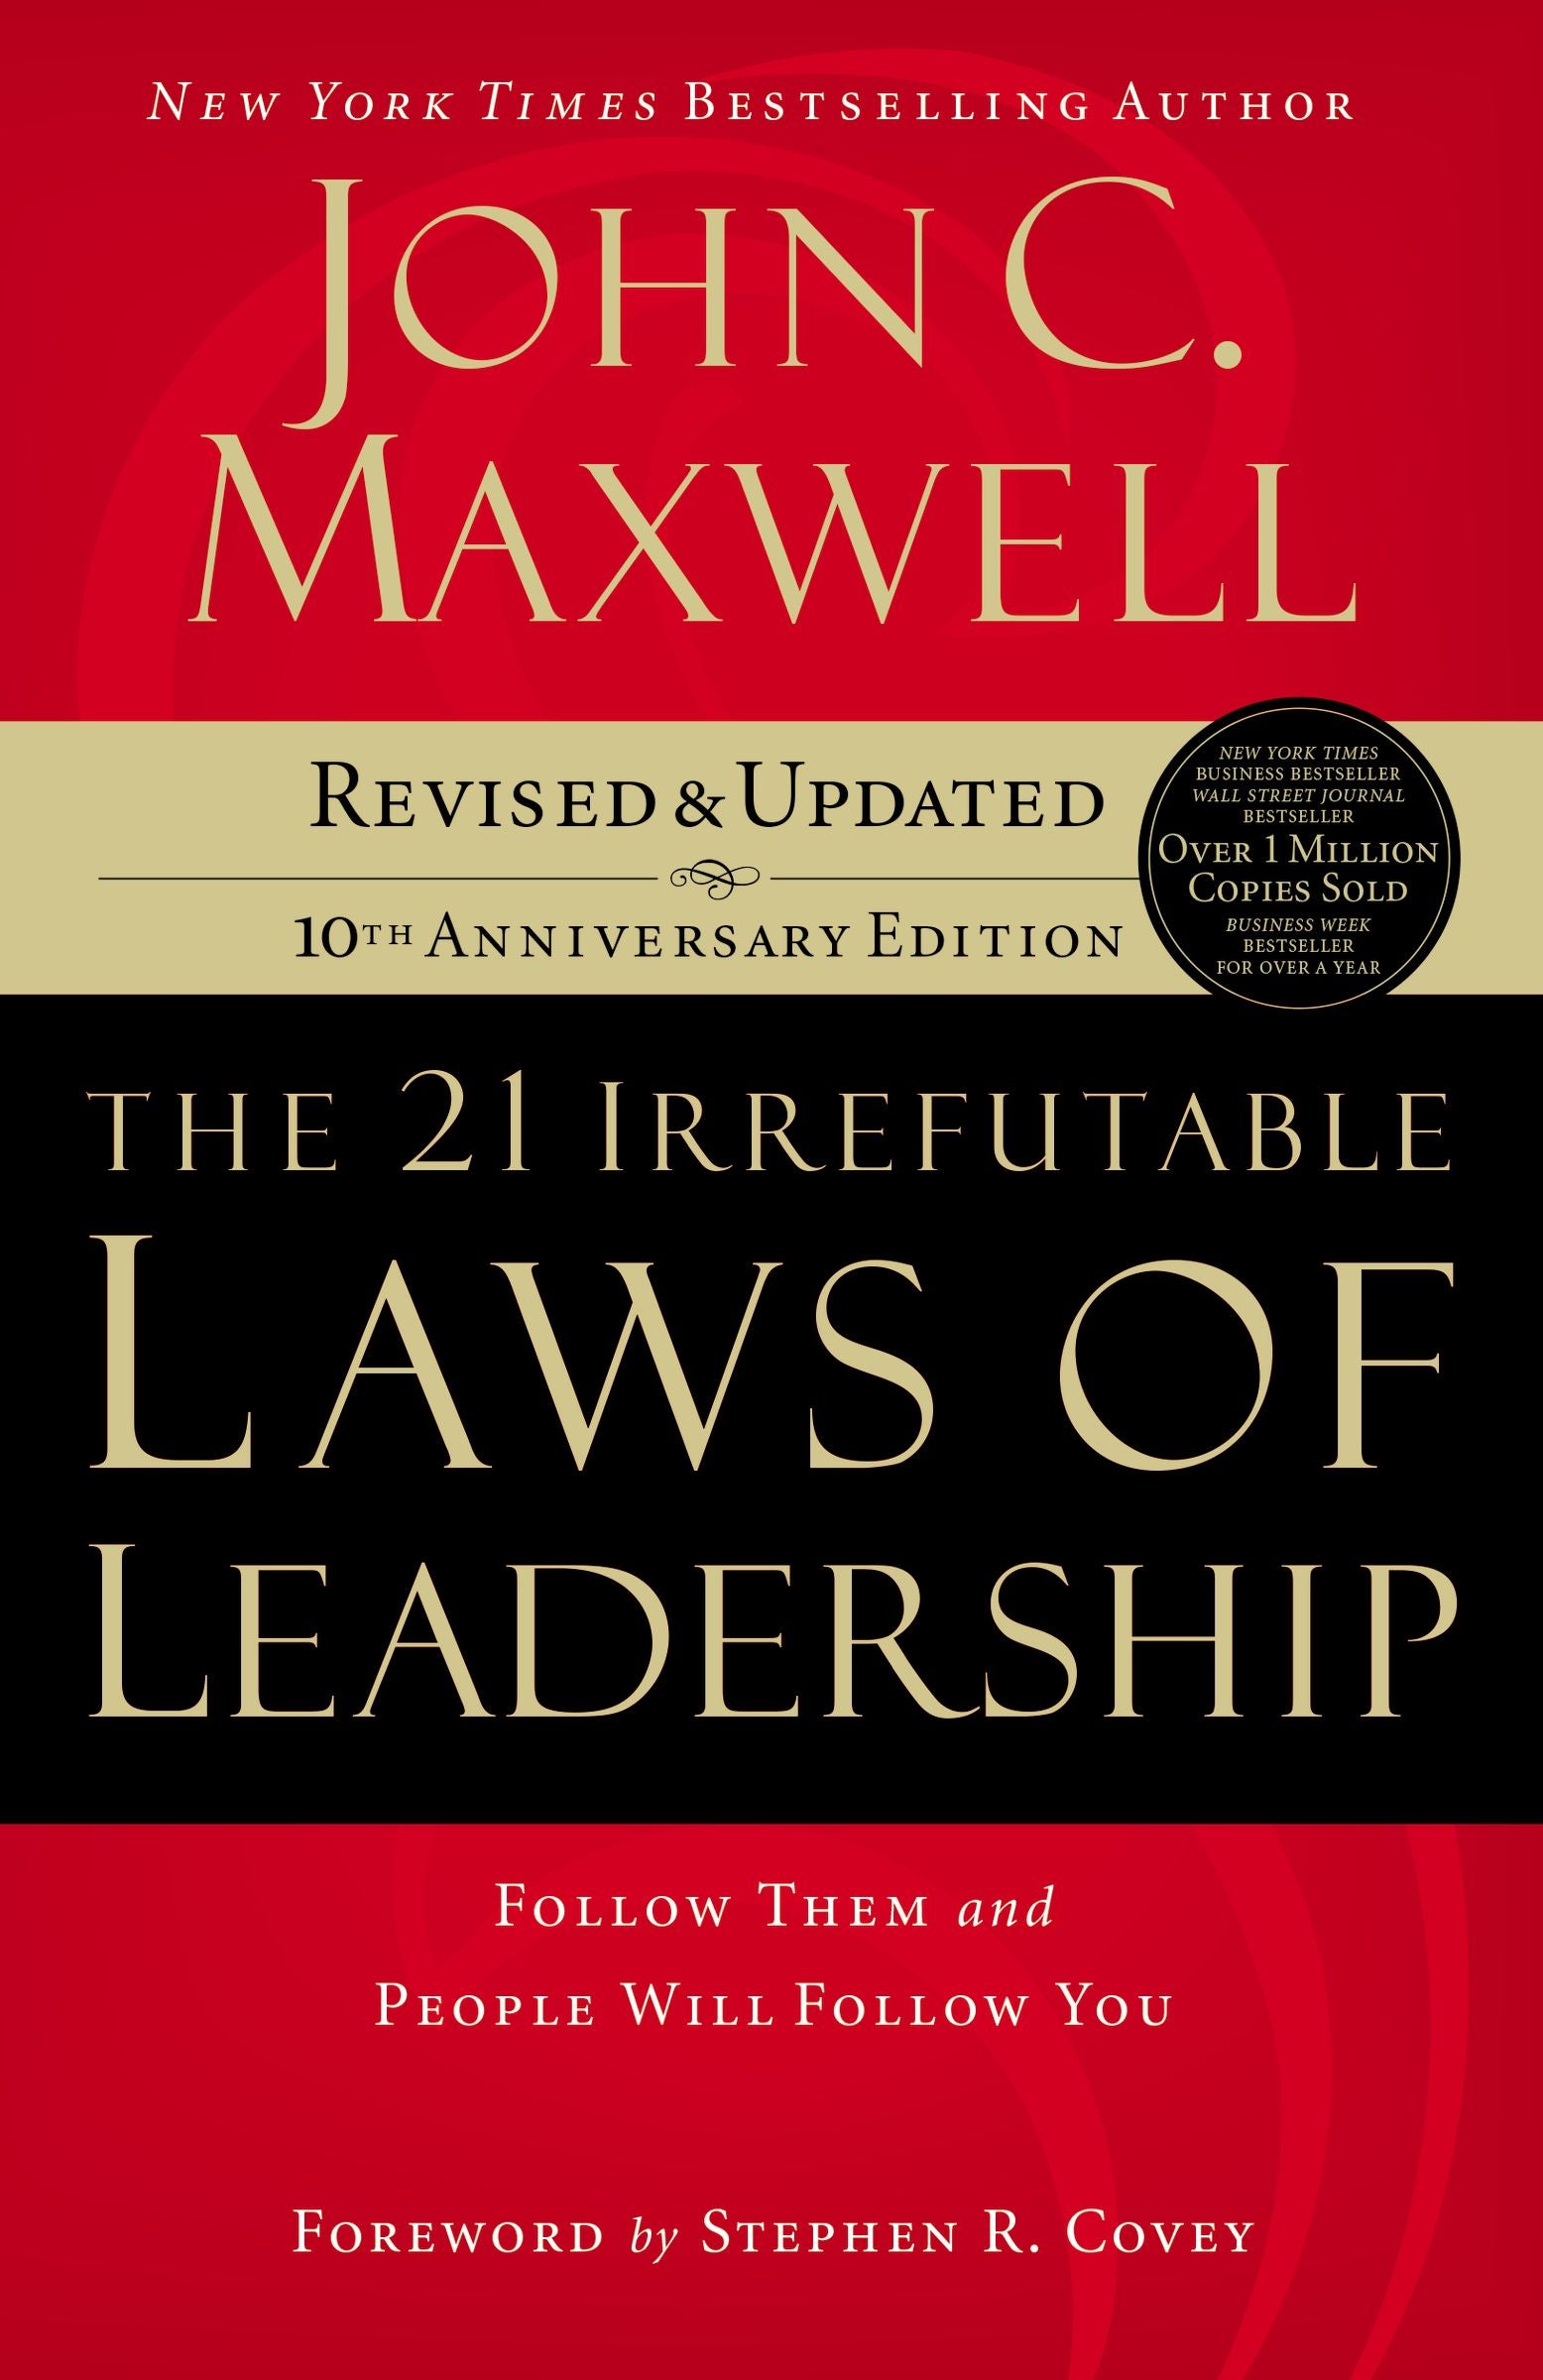 Image of The 21 Irrefutable Laws of Leadership other